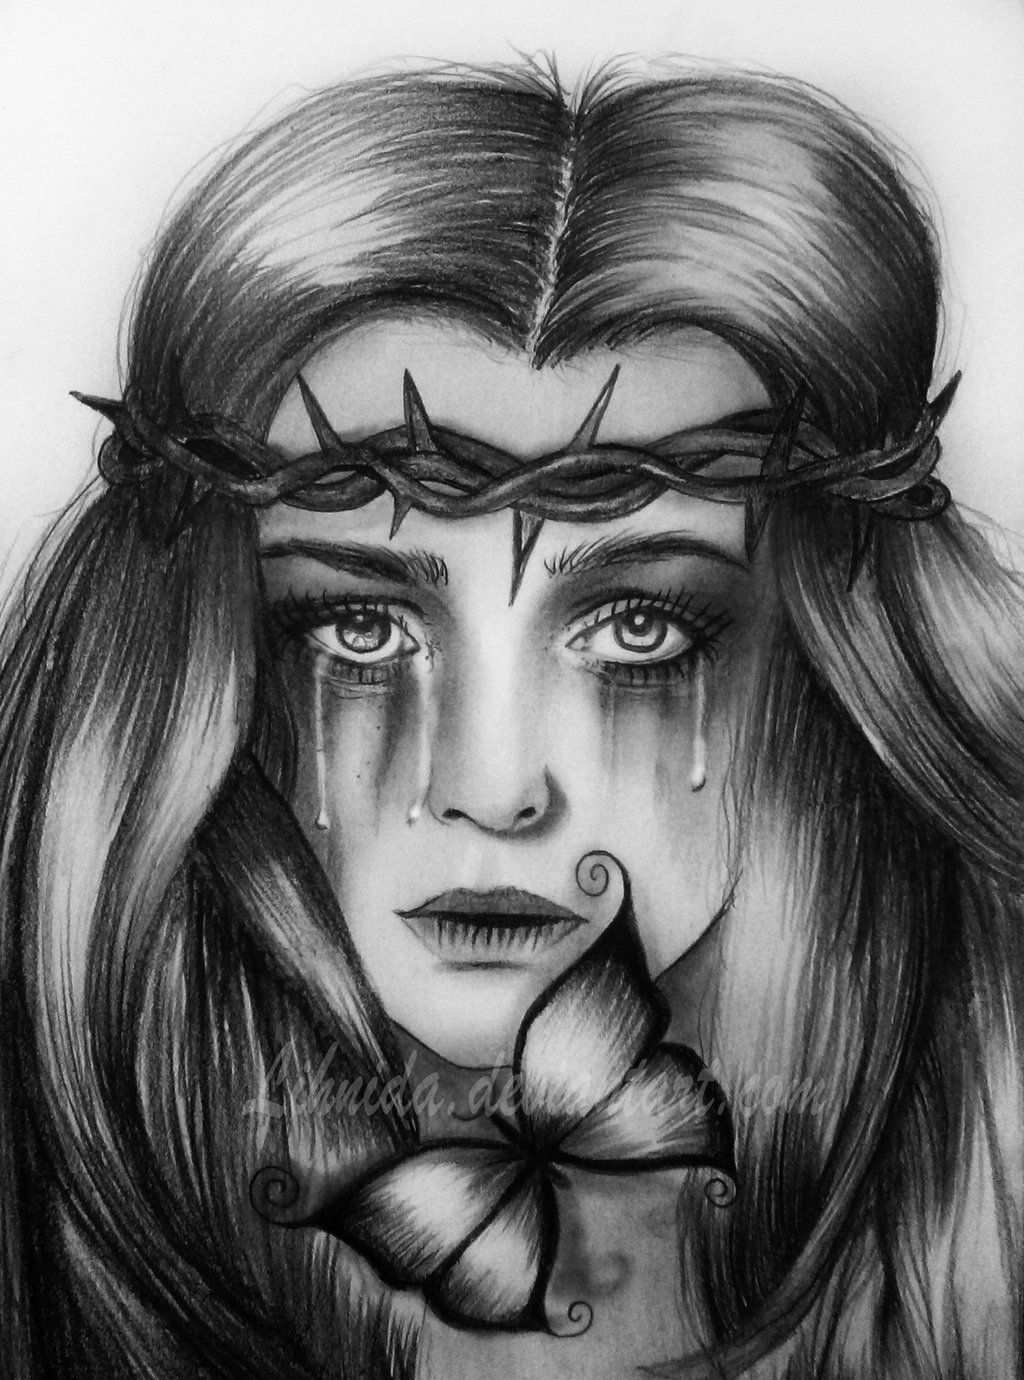 Crying Drawing, Pencil, Sketch, Colorful, Realistic Art Image